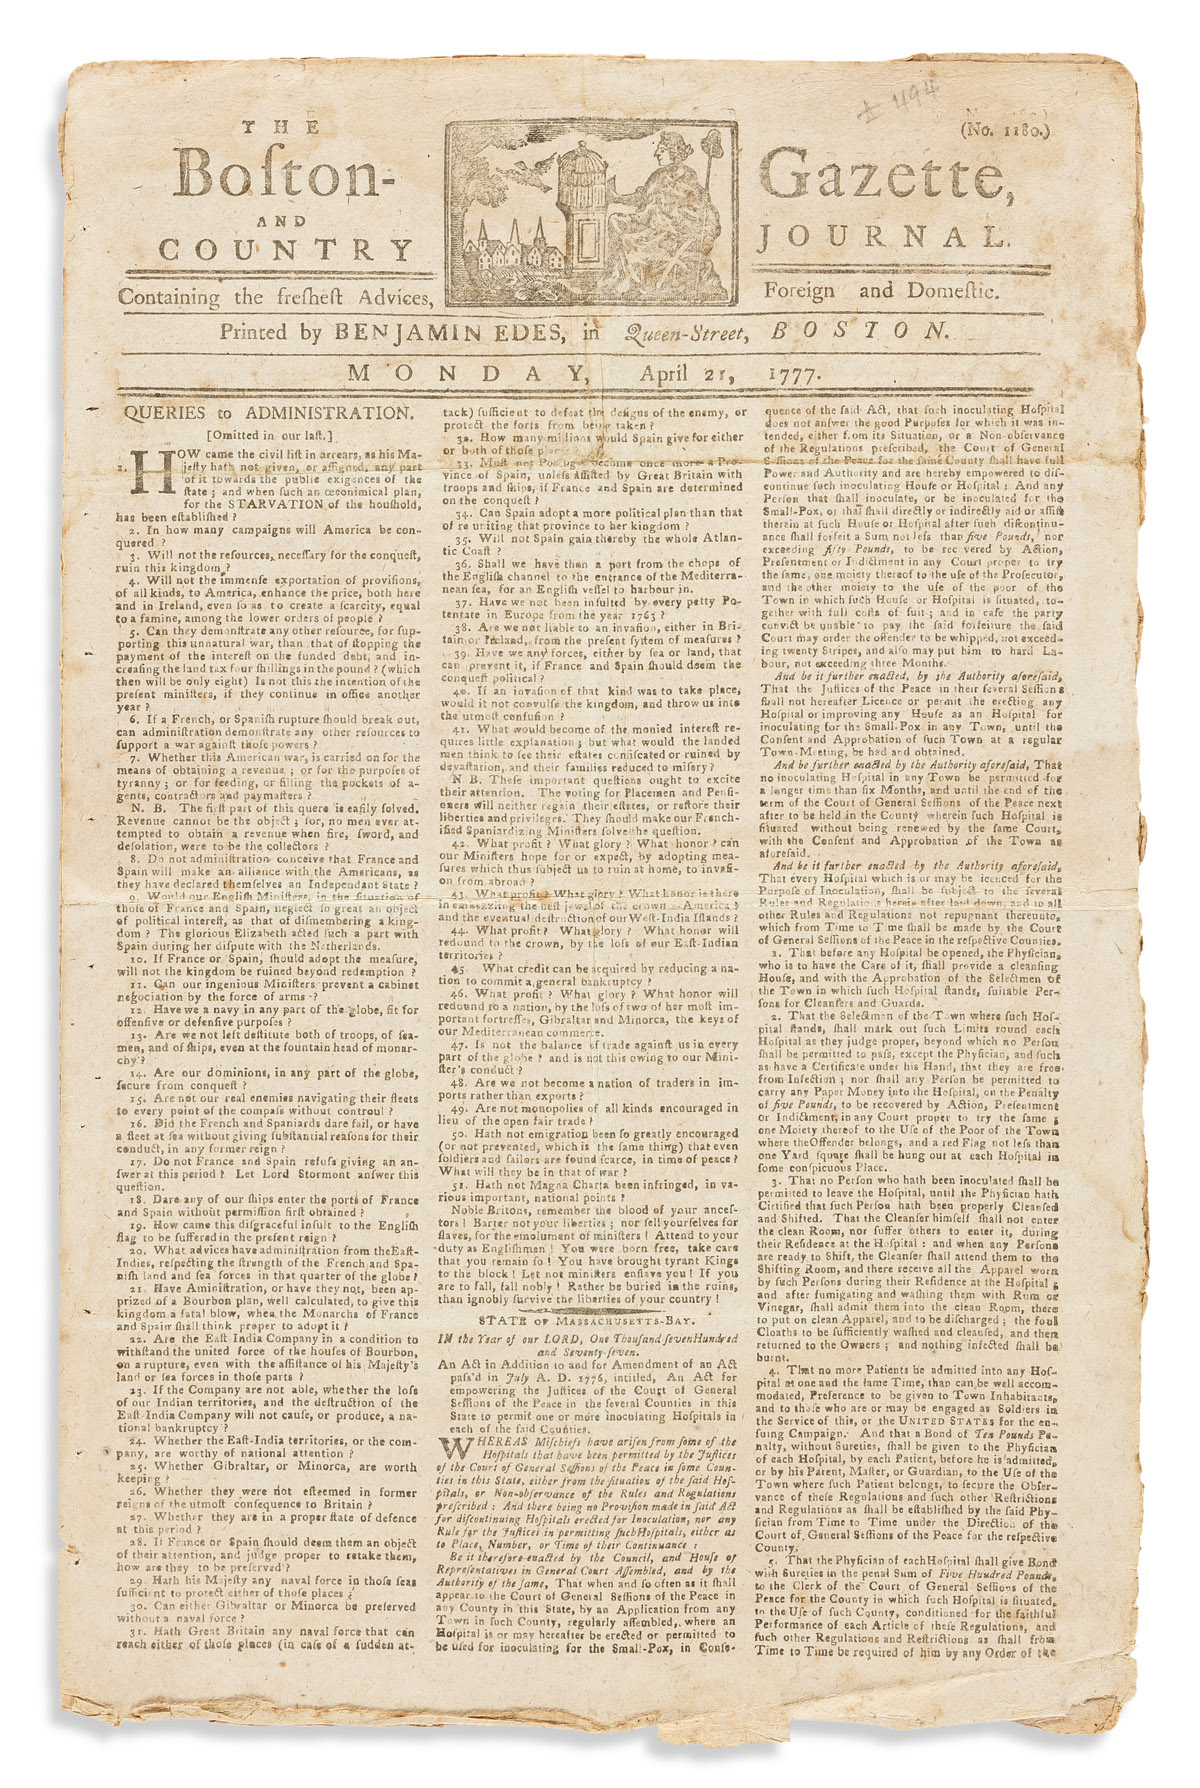 (AMERICAN REVOLUTION--1777.) Issue of the Boston-Gazette and Country Journal.